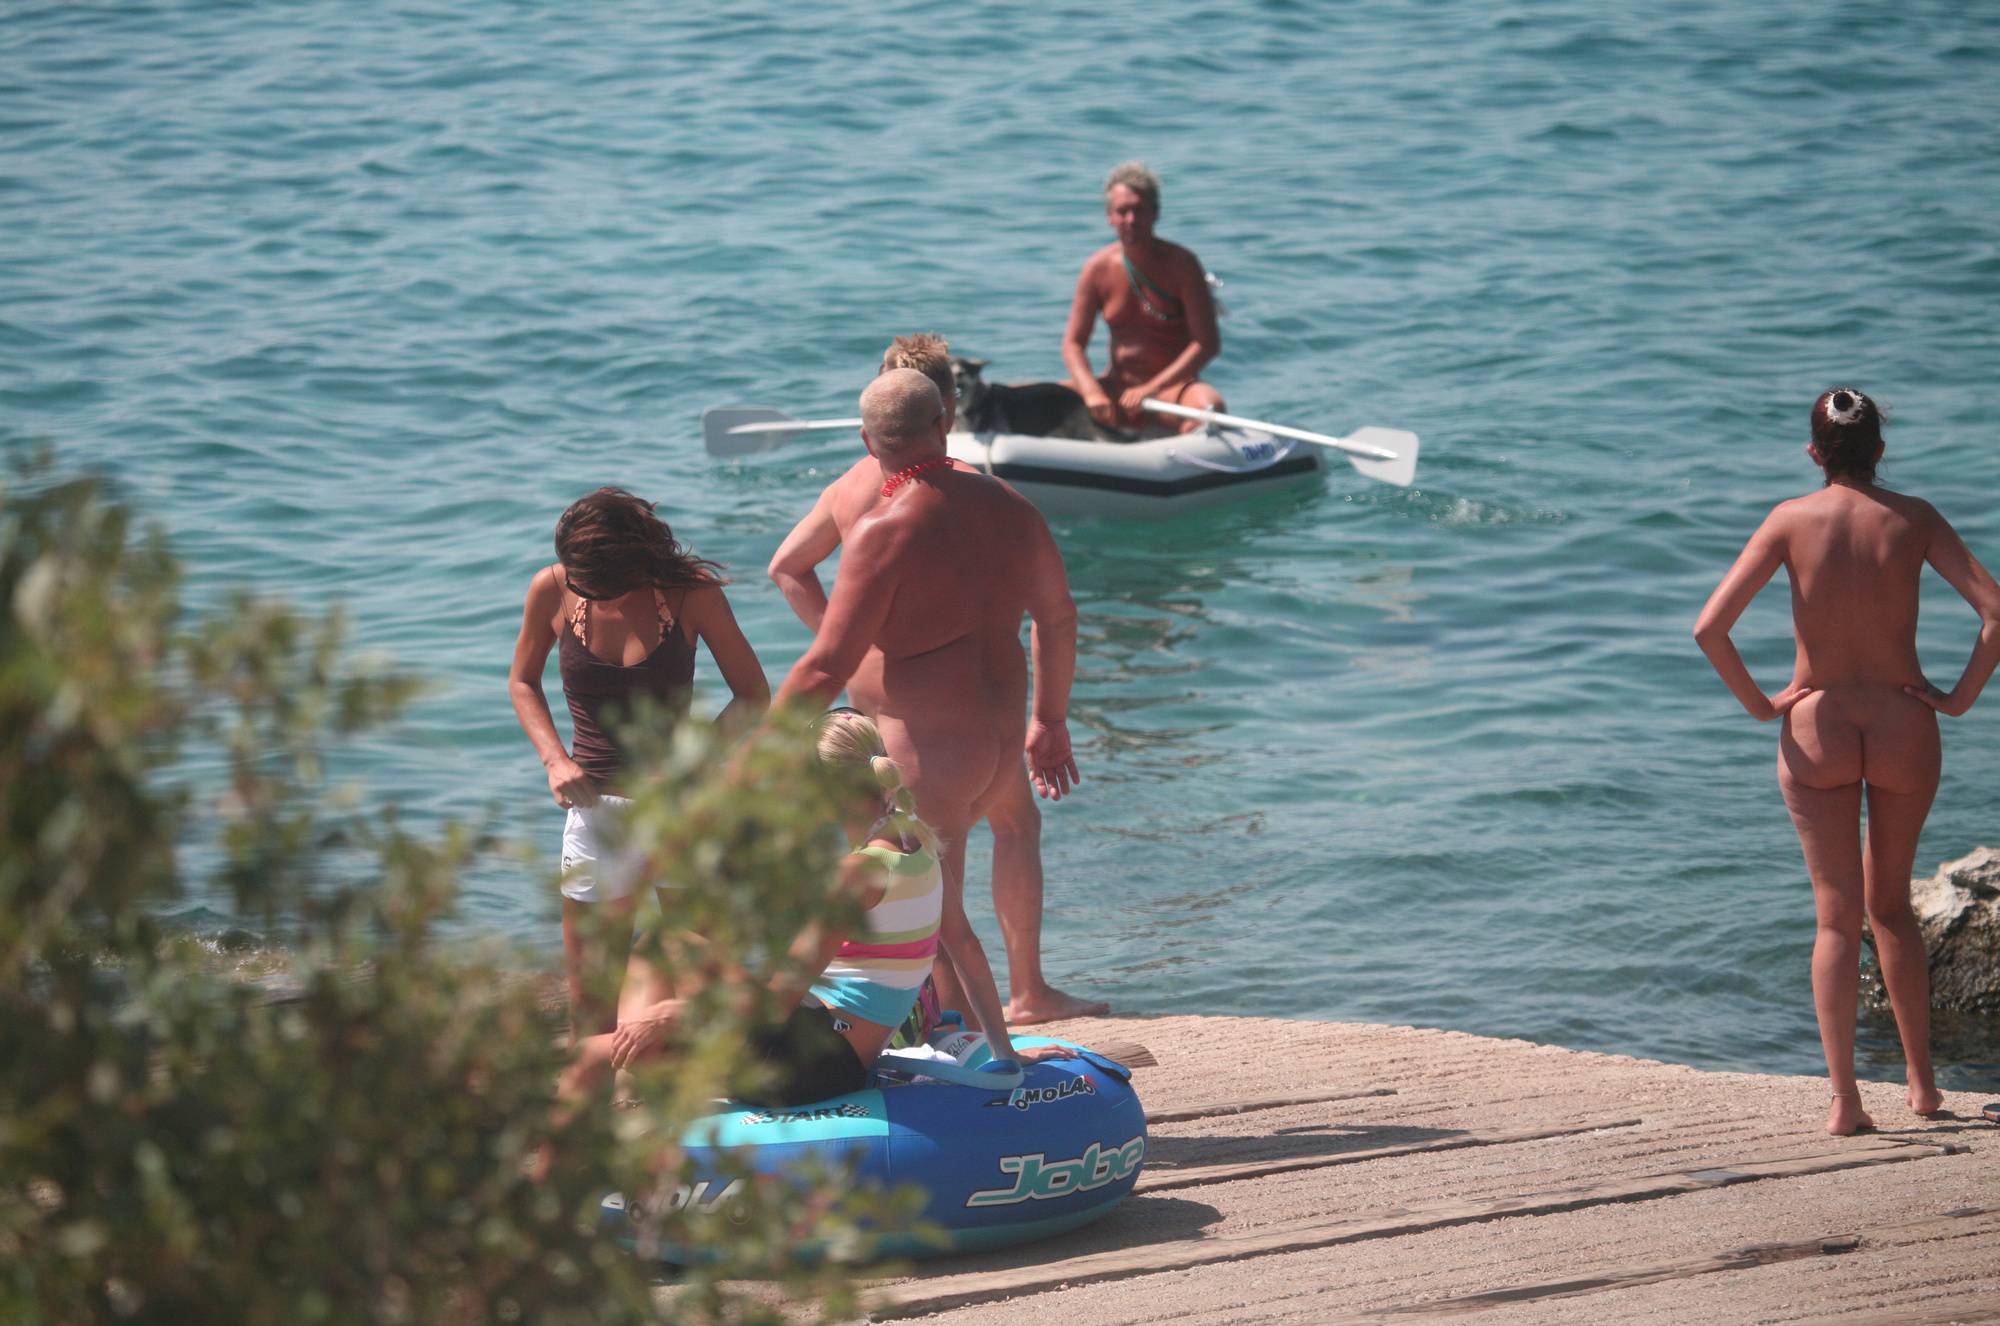 Pure Nudism Pics-Bares FKK Water Boating - 1